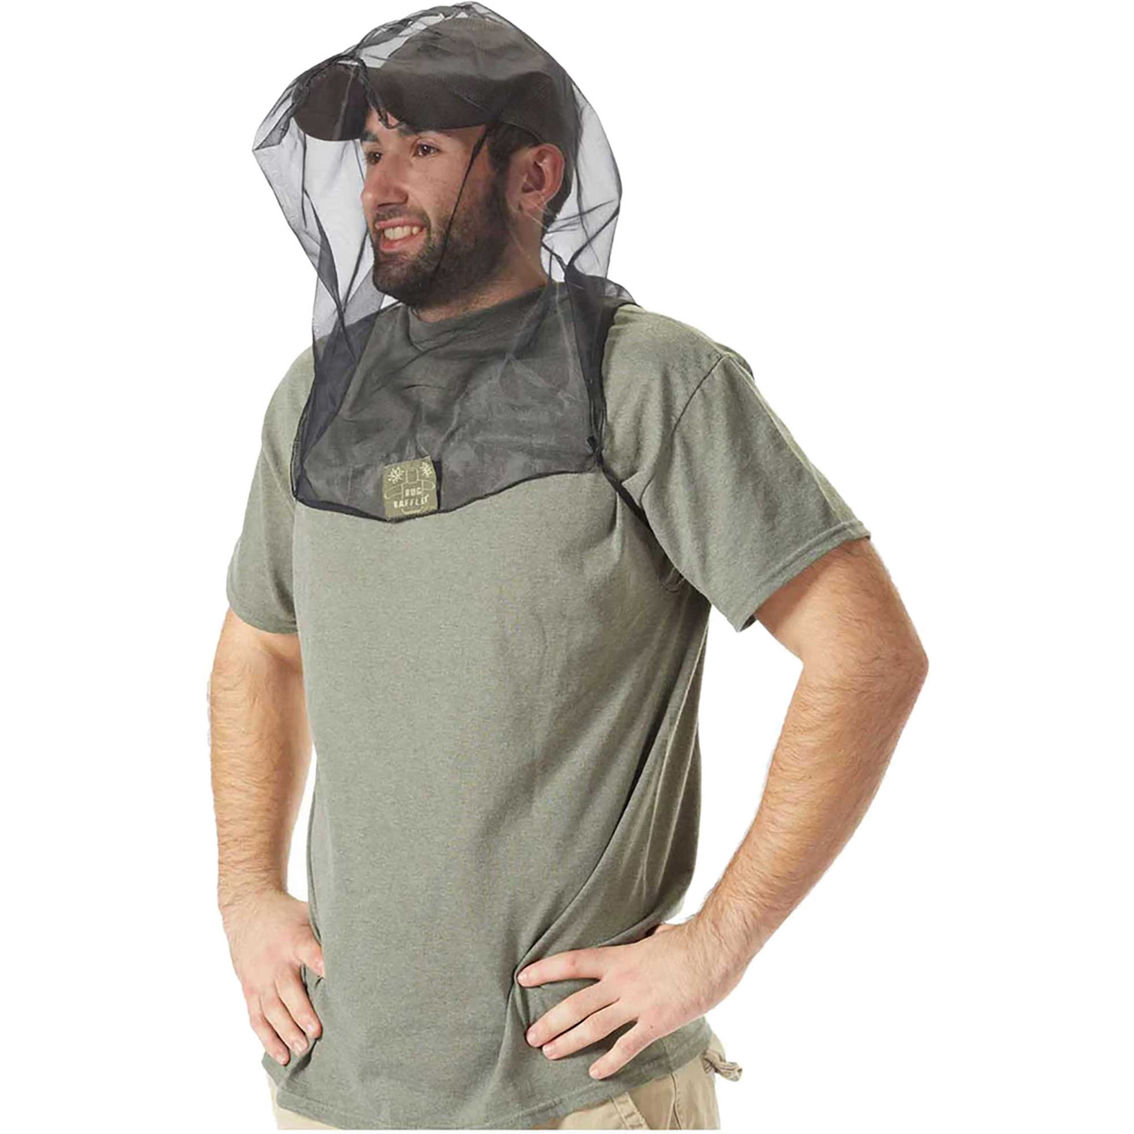 Brigade QM BugBaffler Insect Protective Headnet - Image 2 of 3